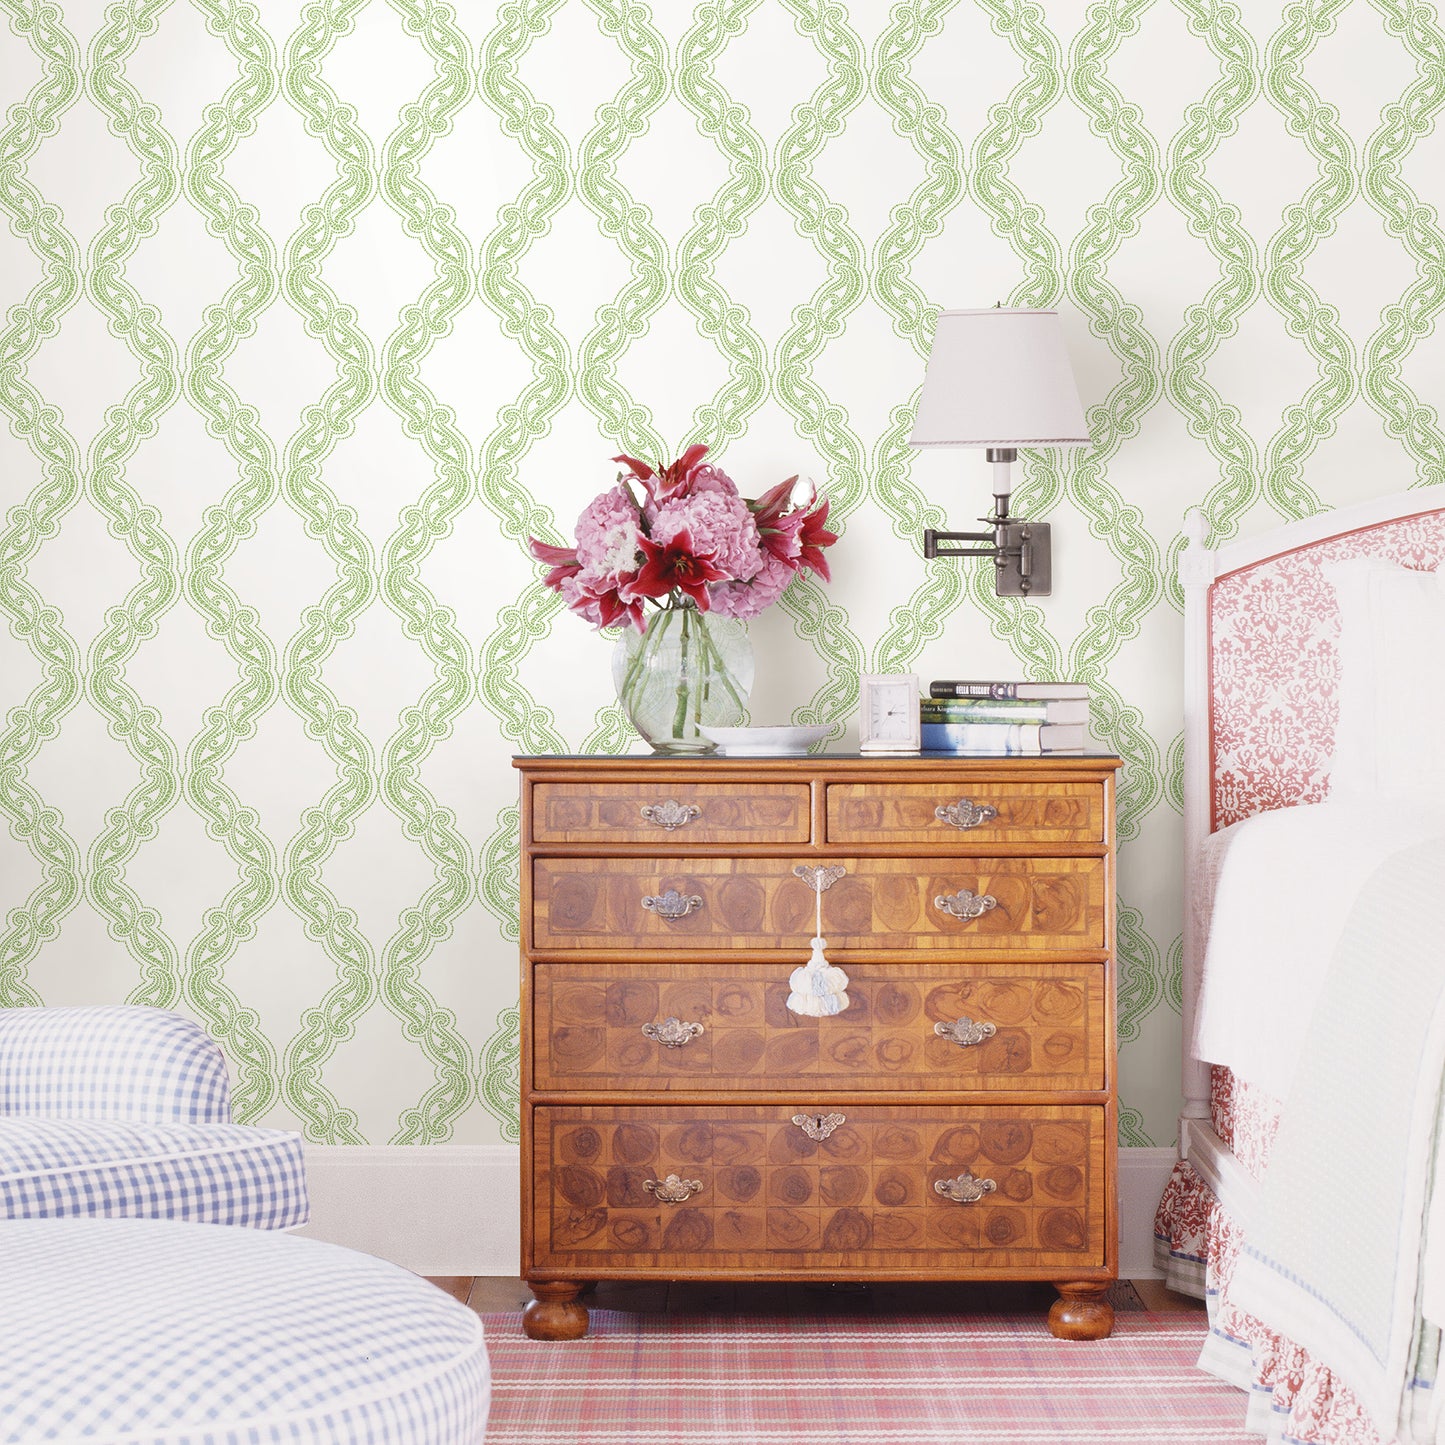 Save on 2702-22725 Harmony Green Ogee by A-Street Prints Wallpaper